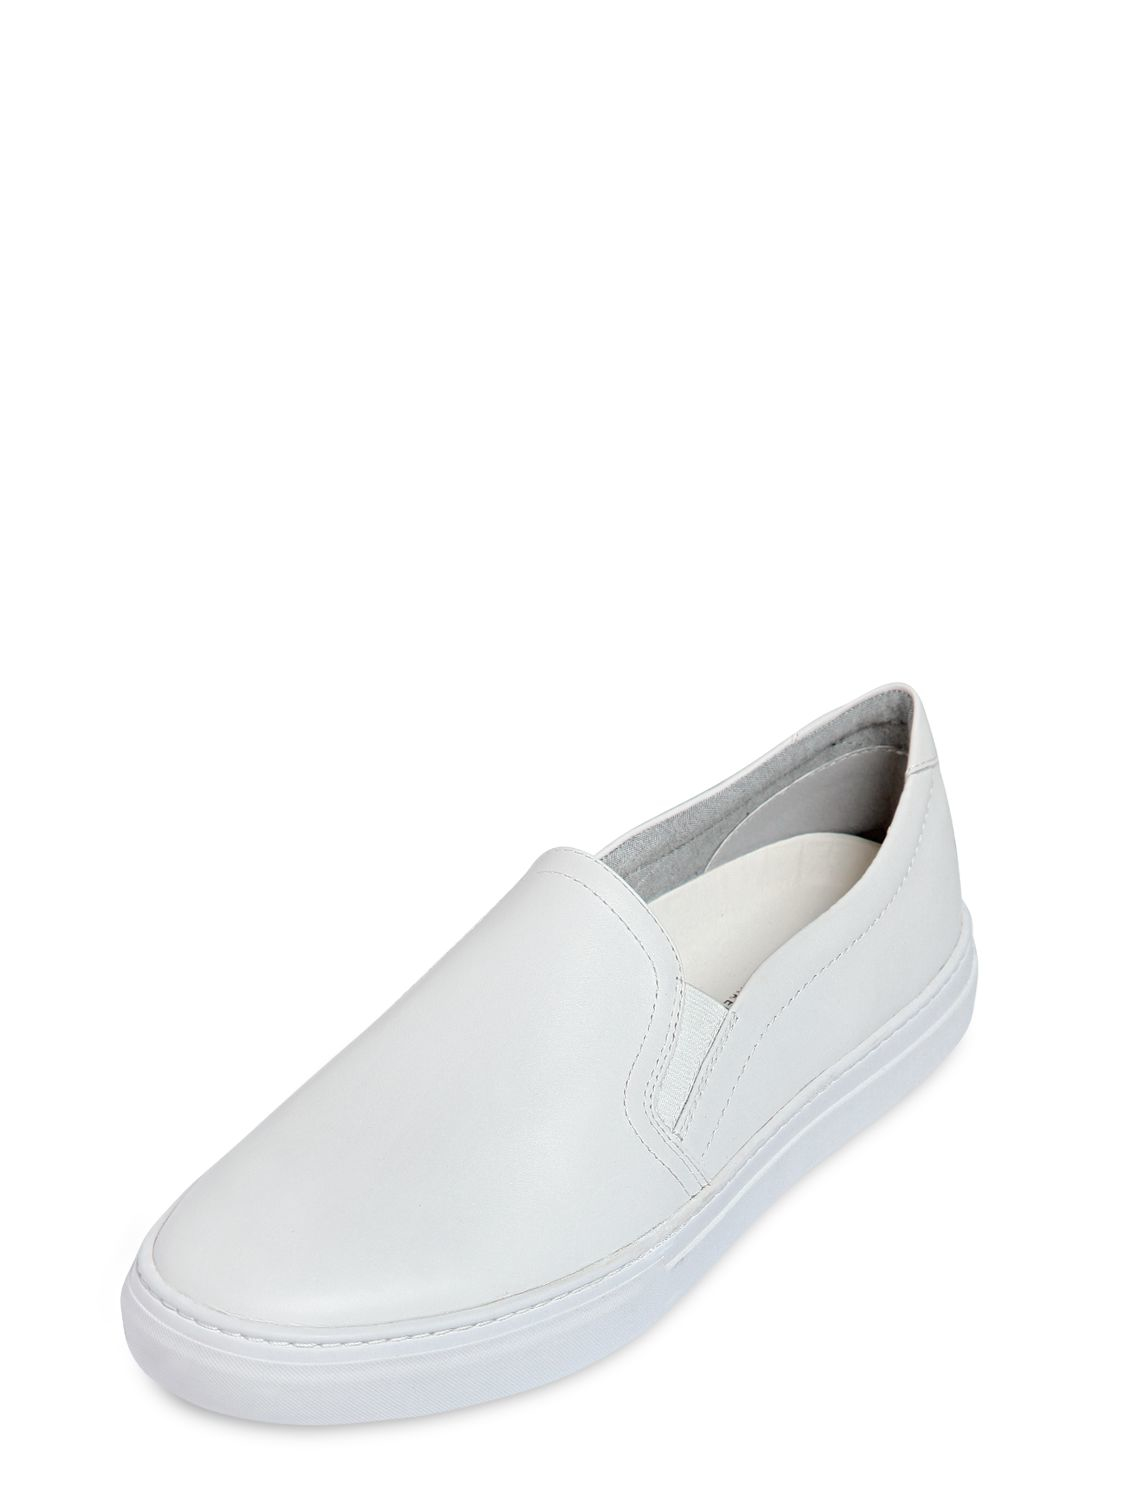 white leather slip on sneakers mens